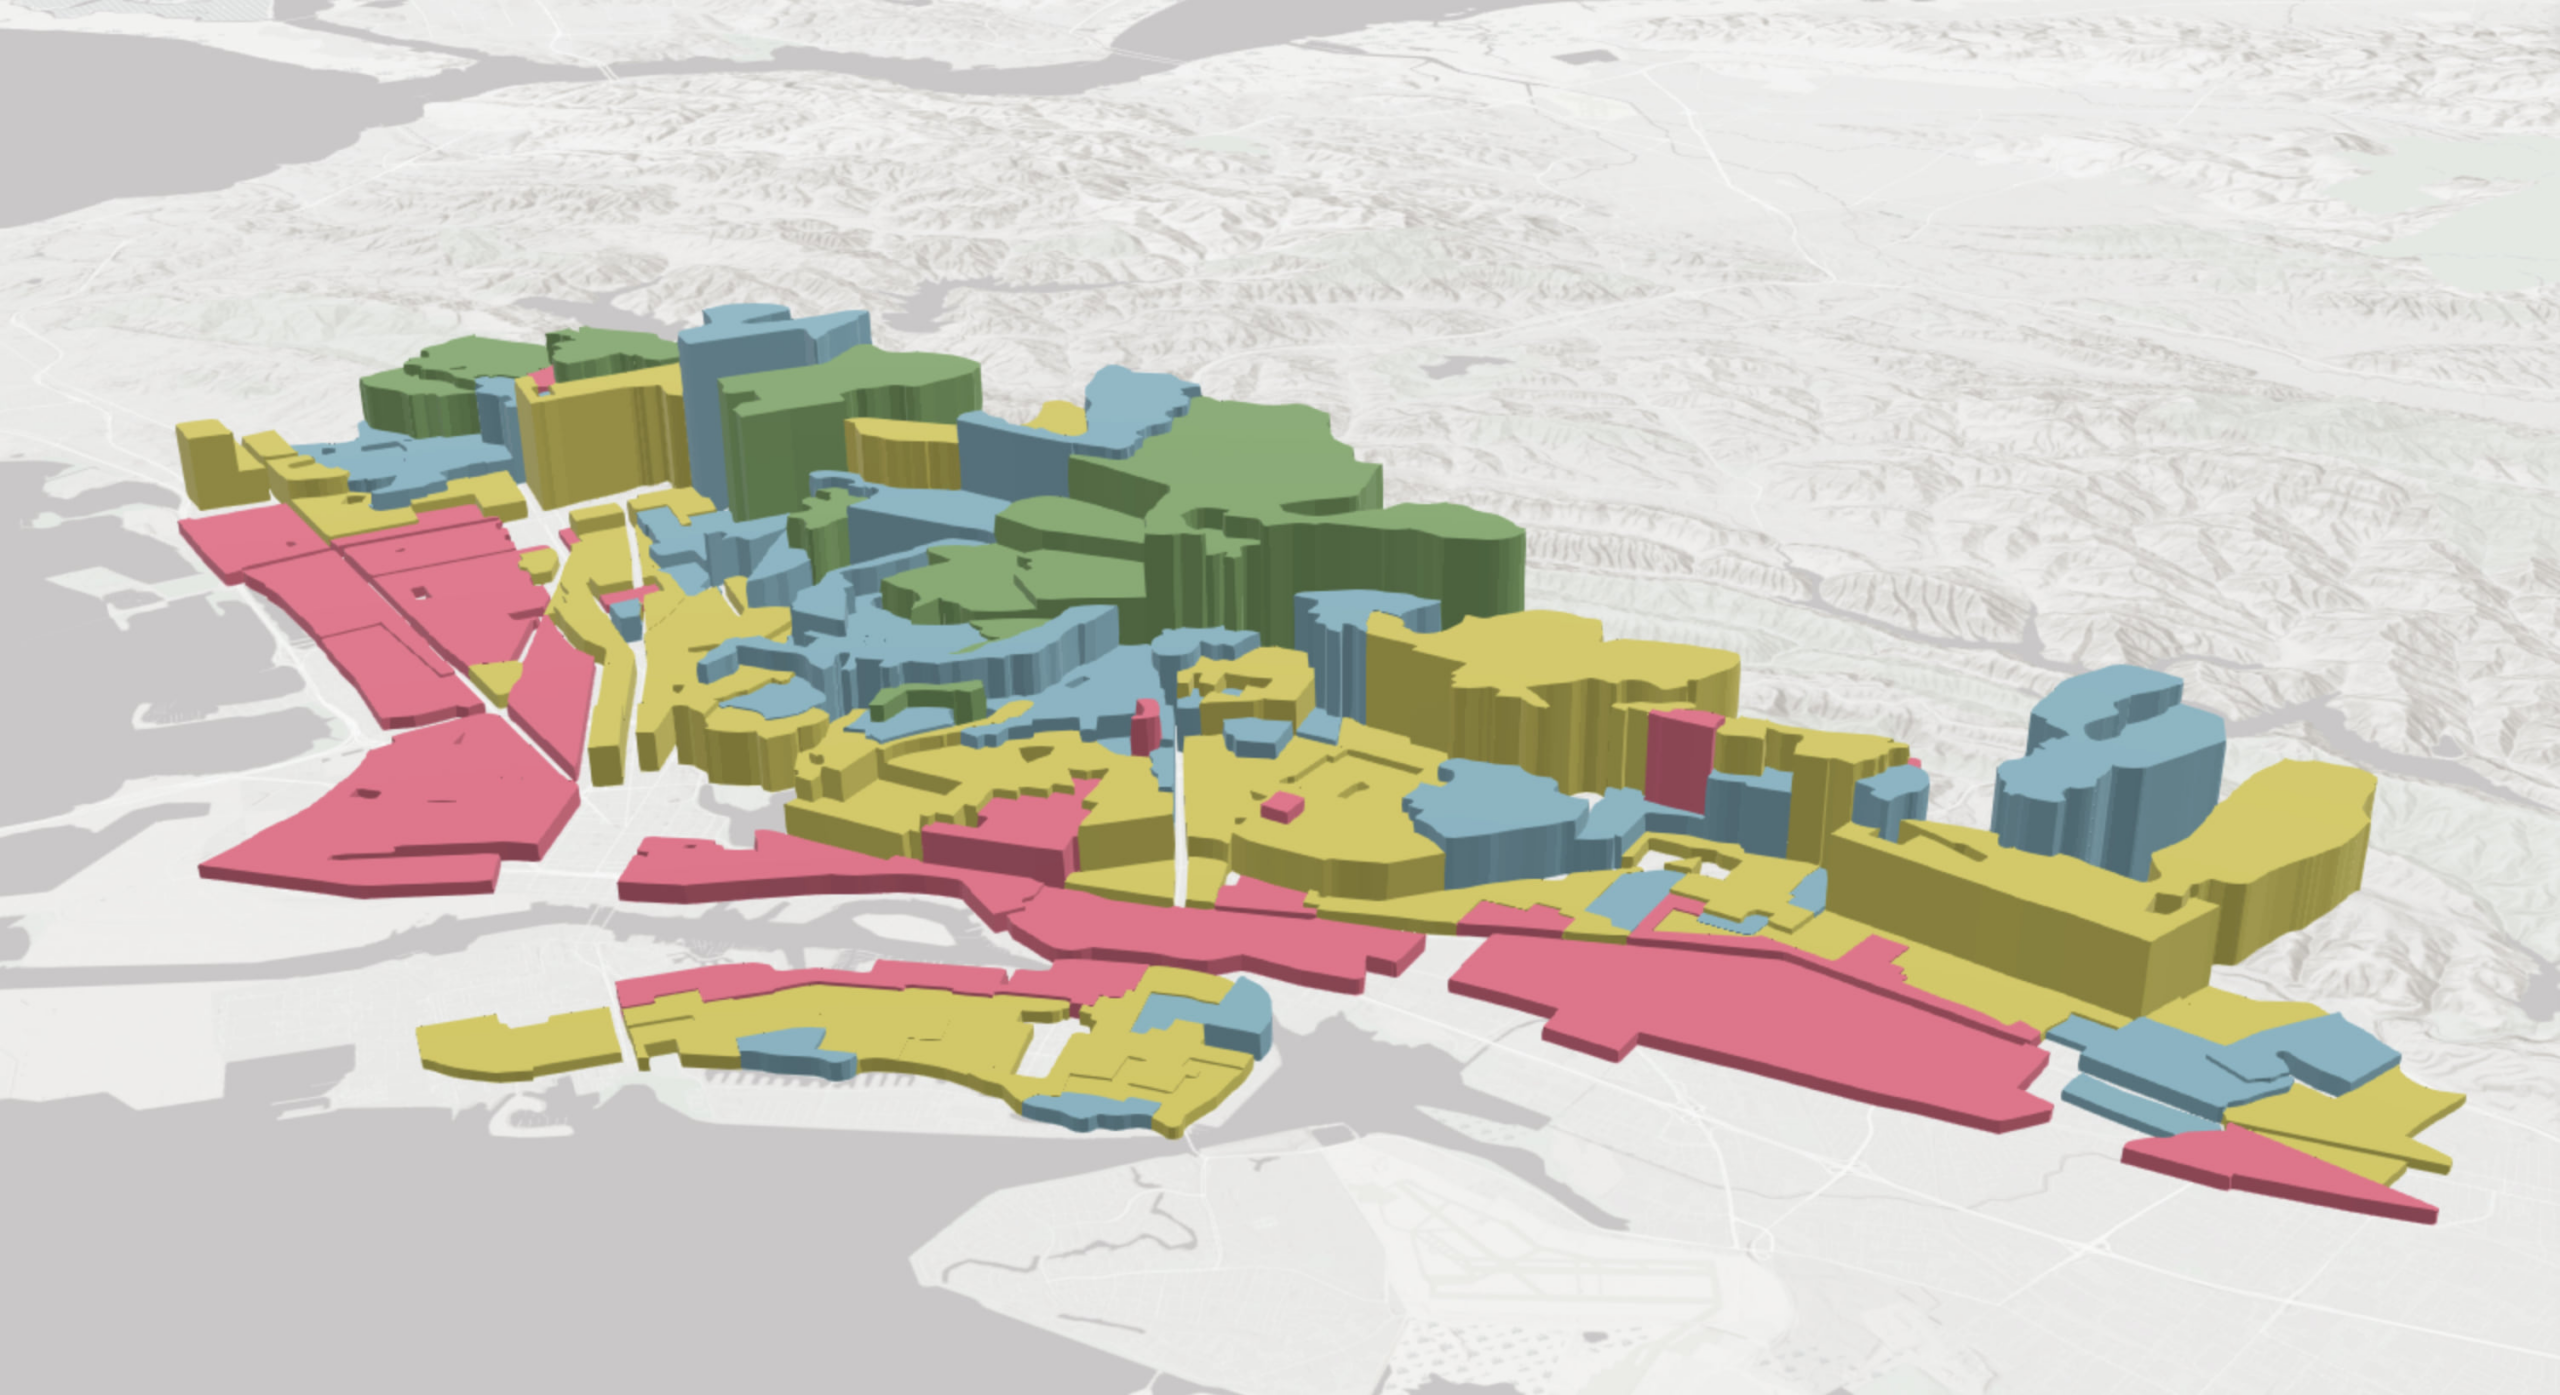 A screenshot of a 3d terrain map of Oakland, with different neighborhoods color coded to show their property values and desirability